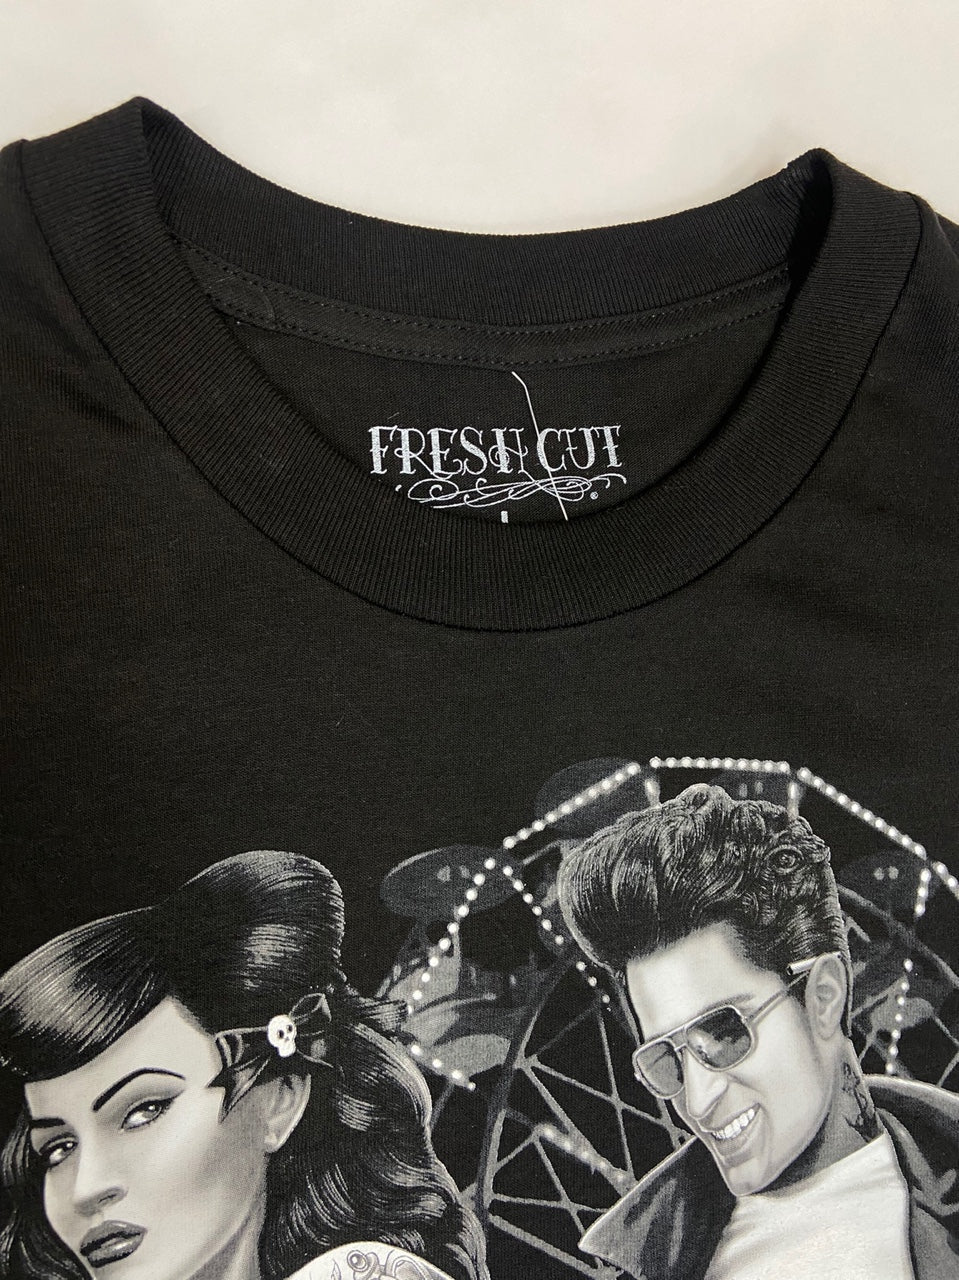 DGA Fresh Cut Greasers Graphic T-Shirt